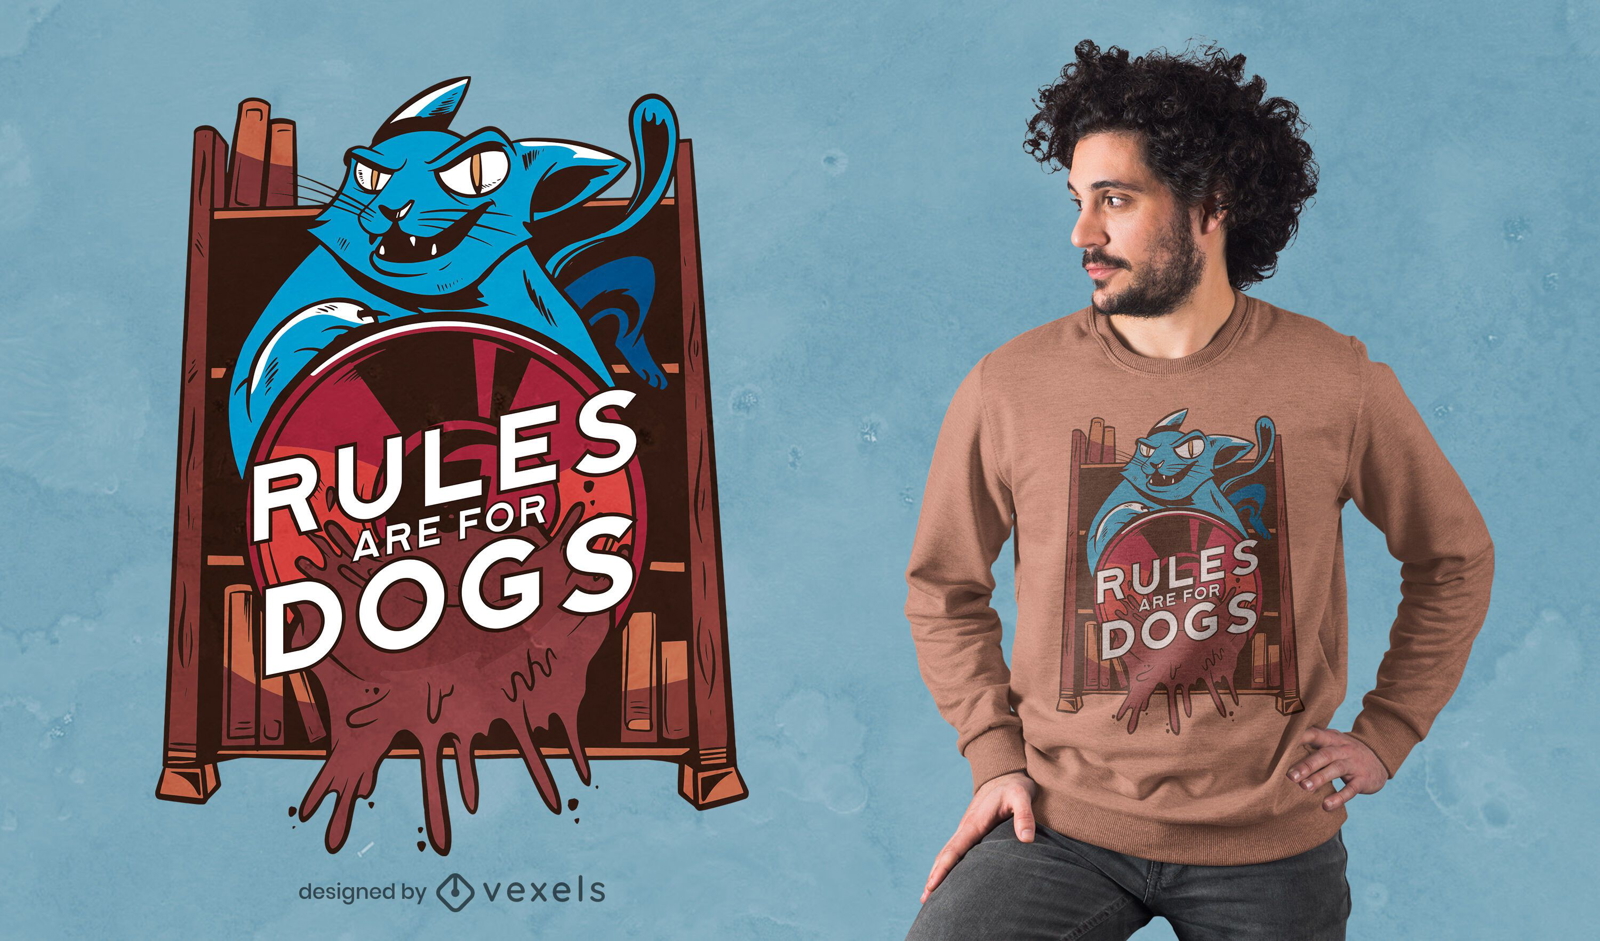 Rules for dogs t-shirt design